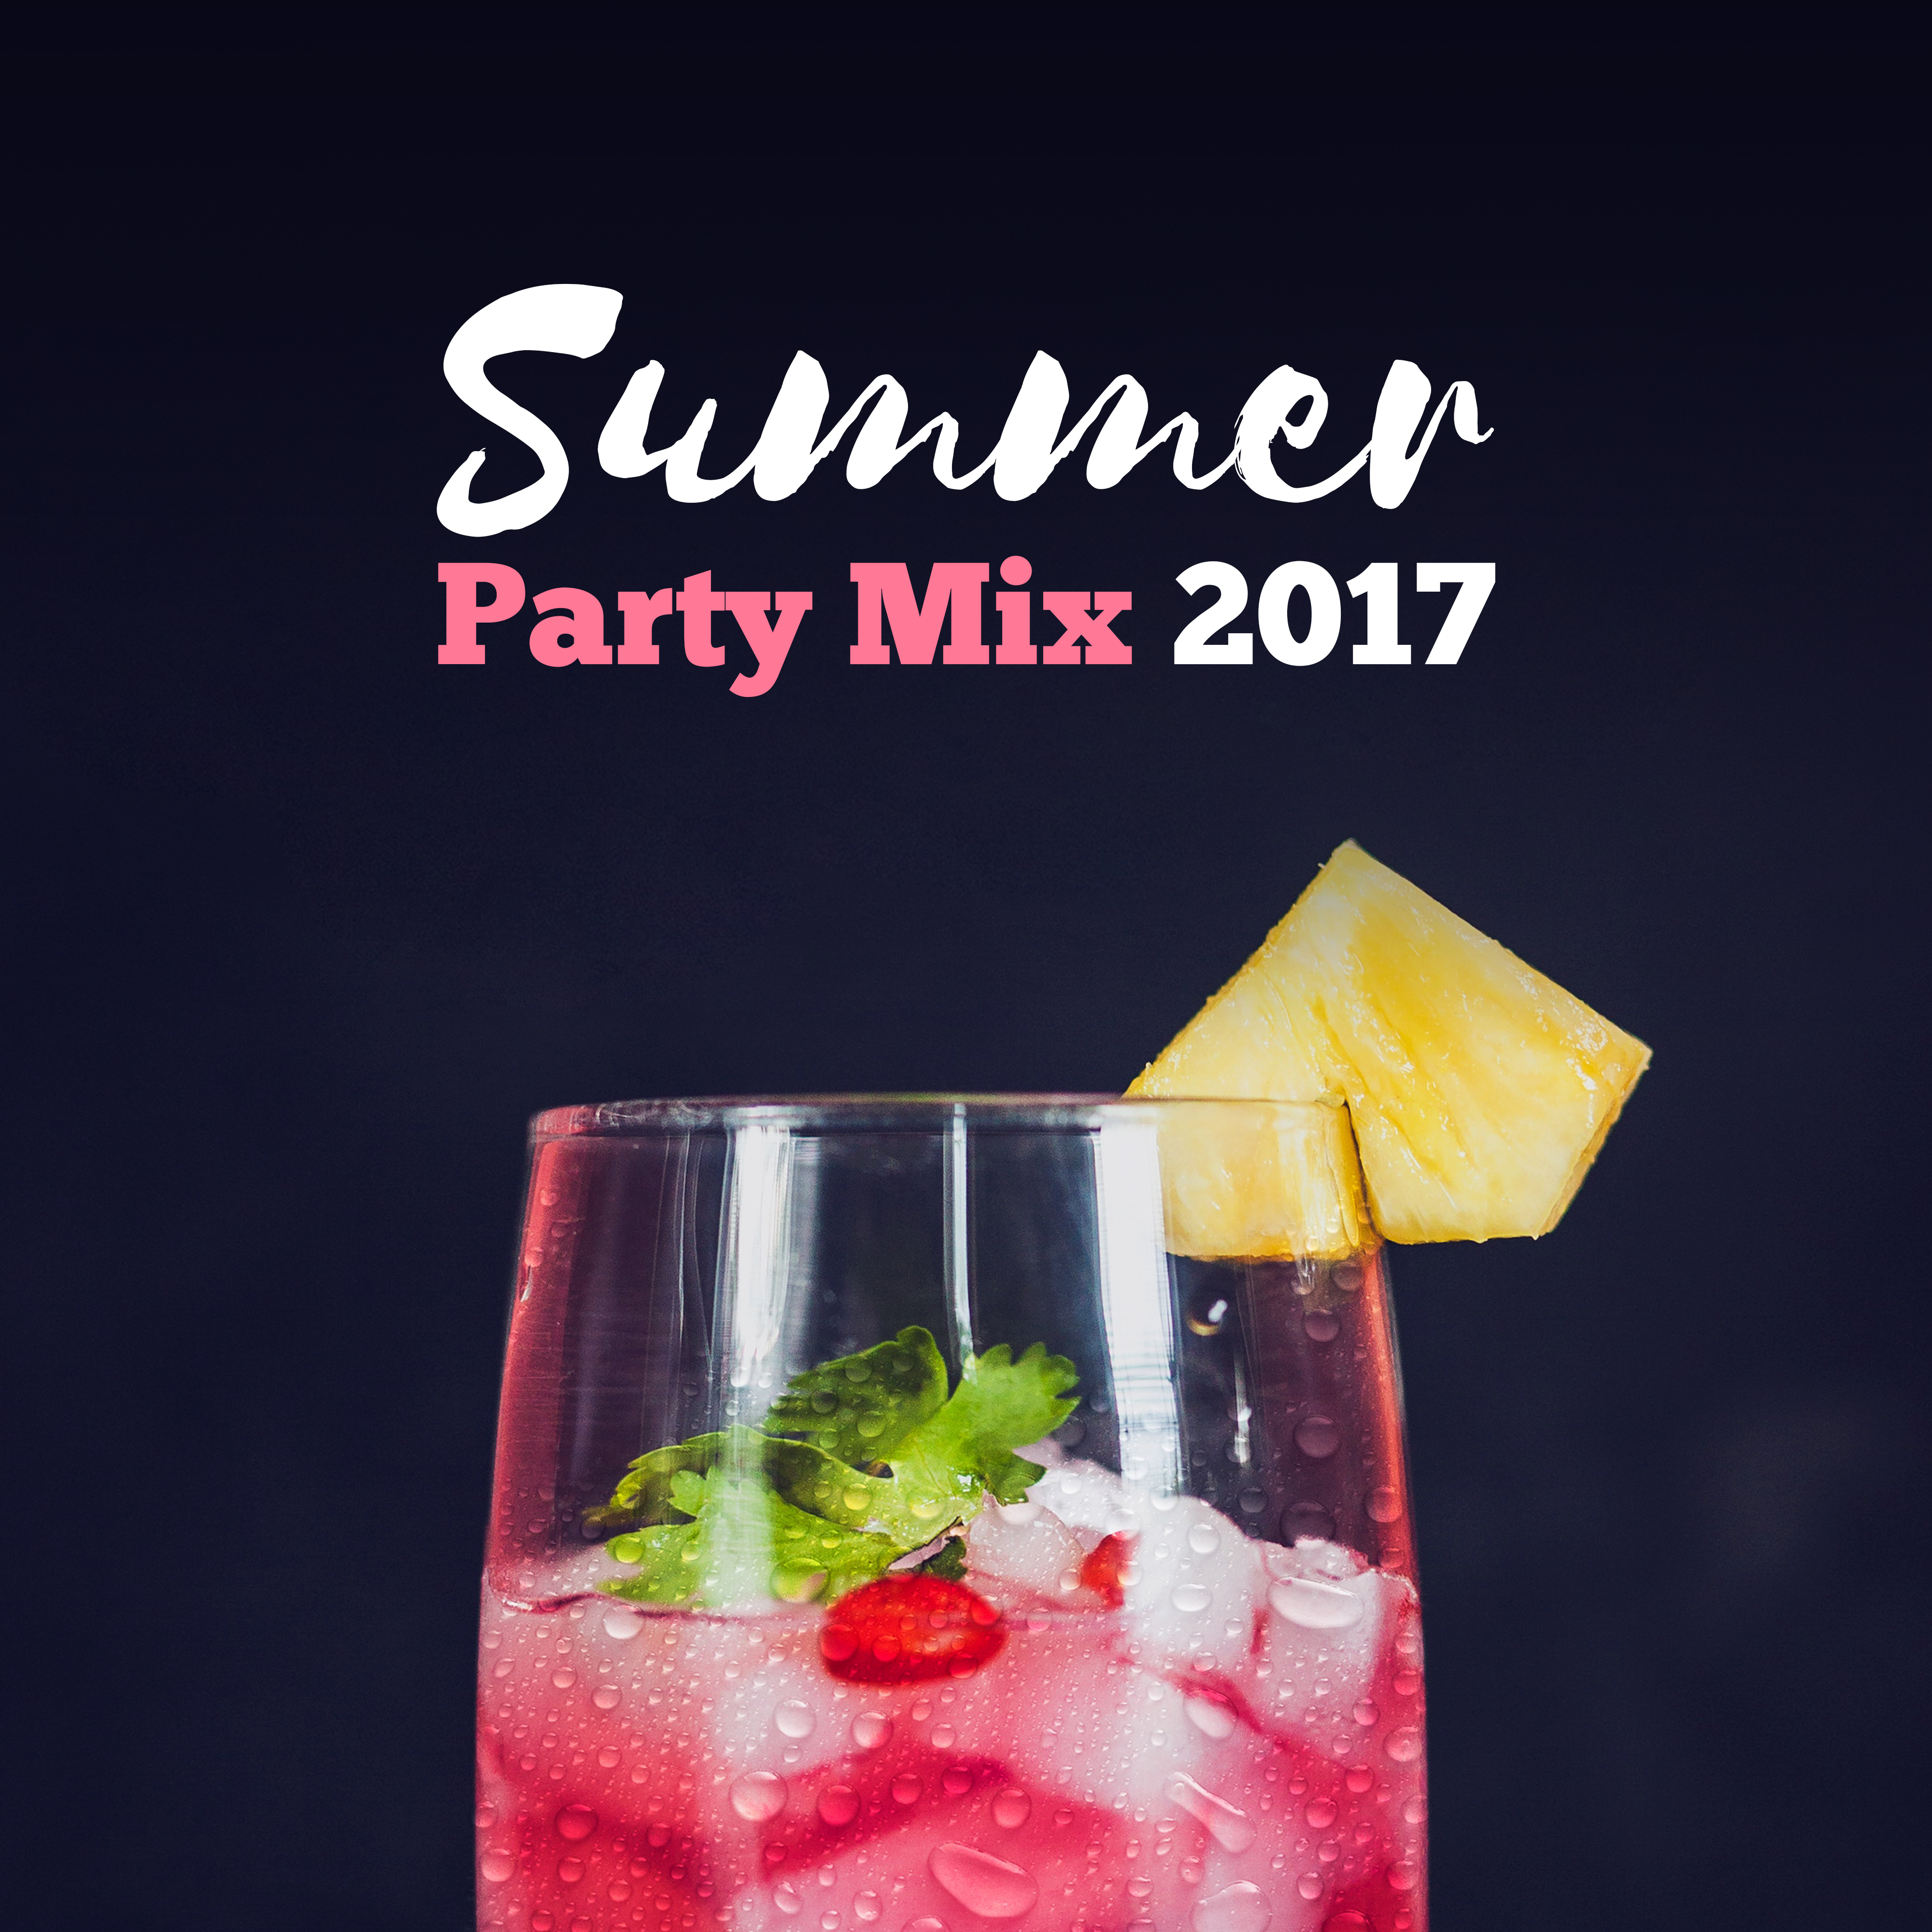 Summer Party Mix 2017 – Chillout Music, Deep Beats, Party Hits, Ambient Lounge, Ibiza Dance